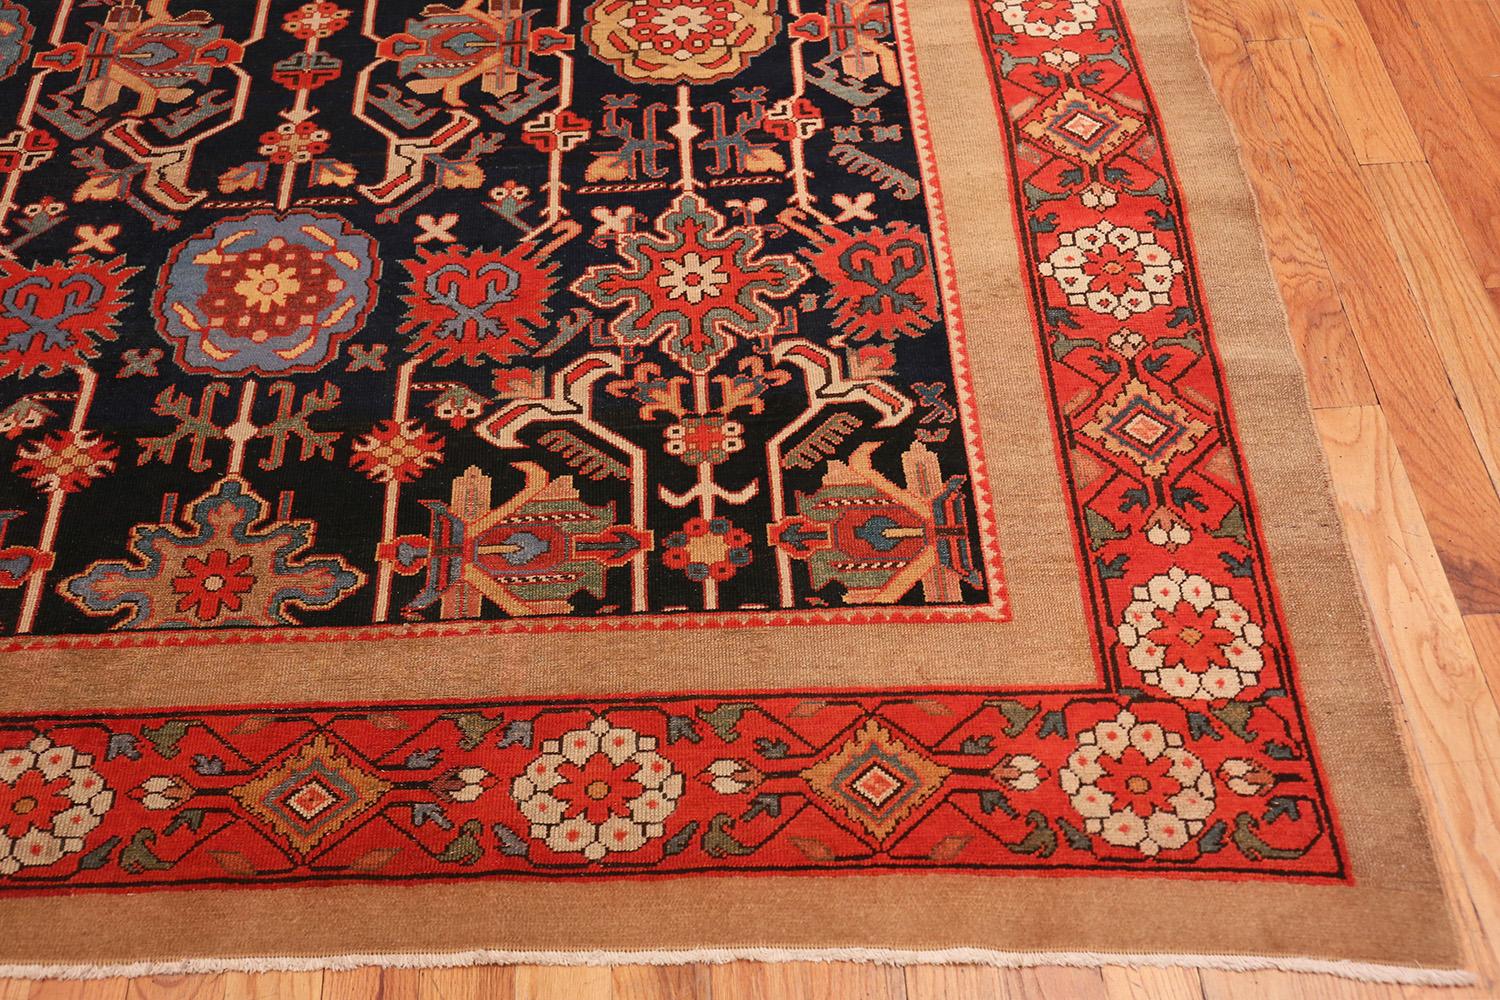 Tribal Antique Persian North West Persian Rug. Size: 8 ft 8 in x 16 ft 10 in